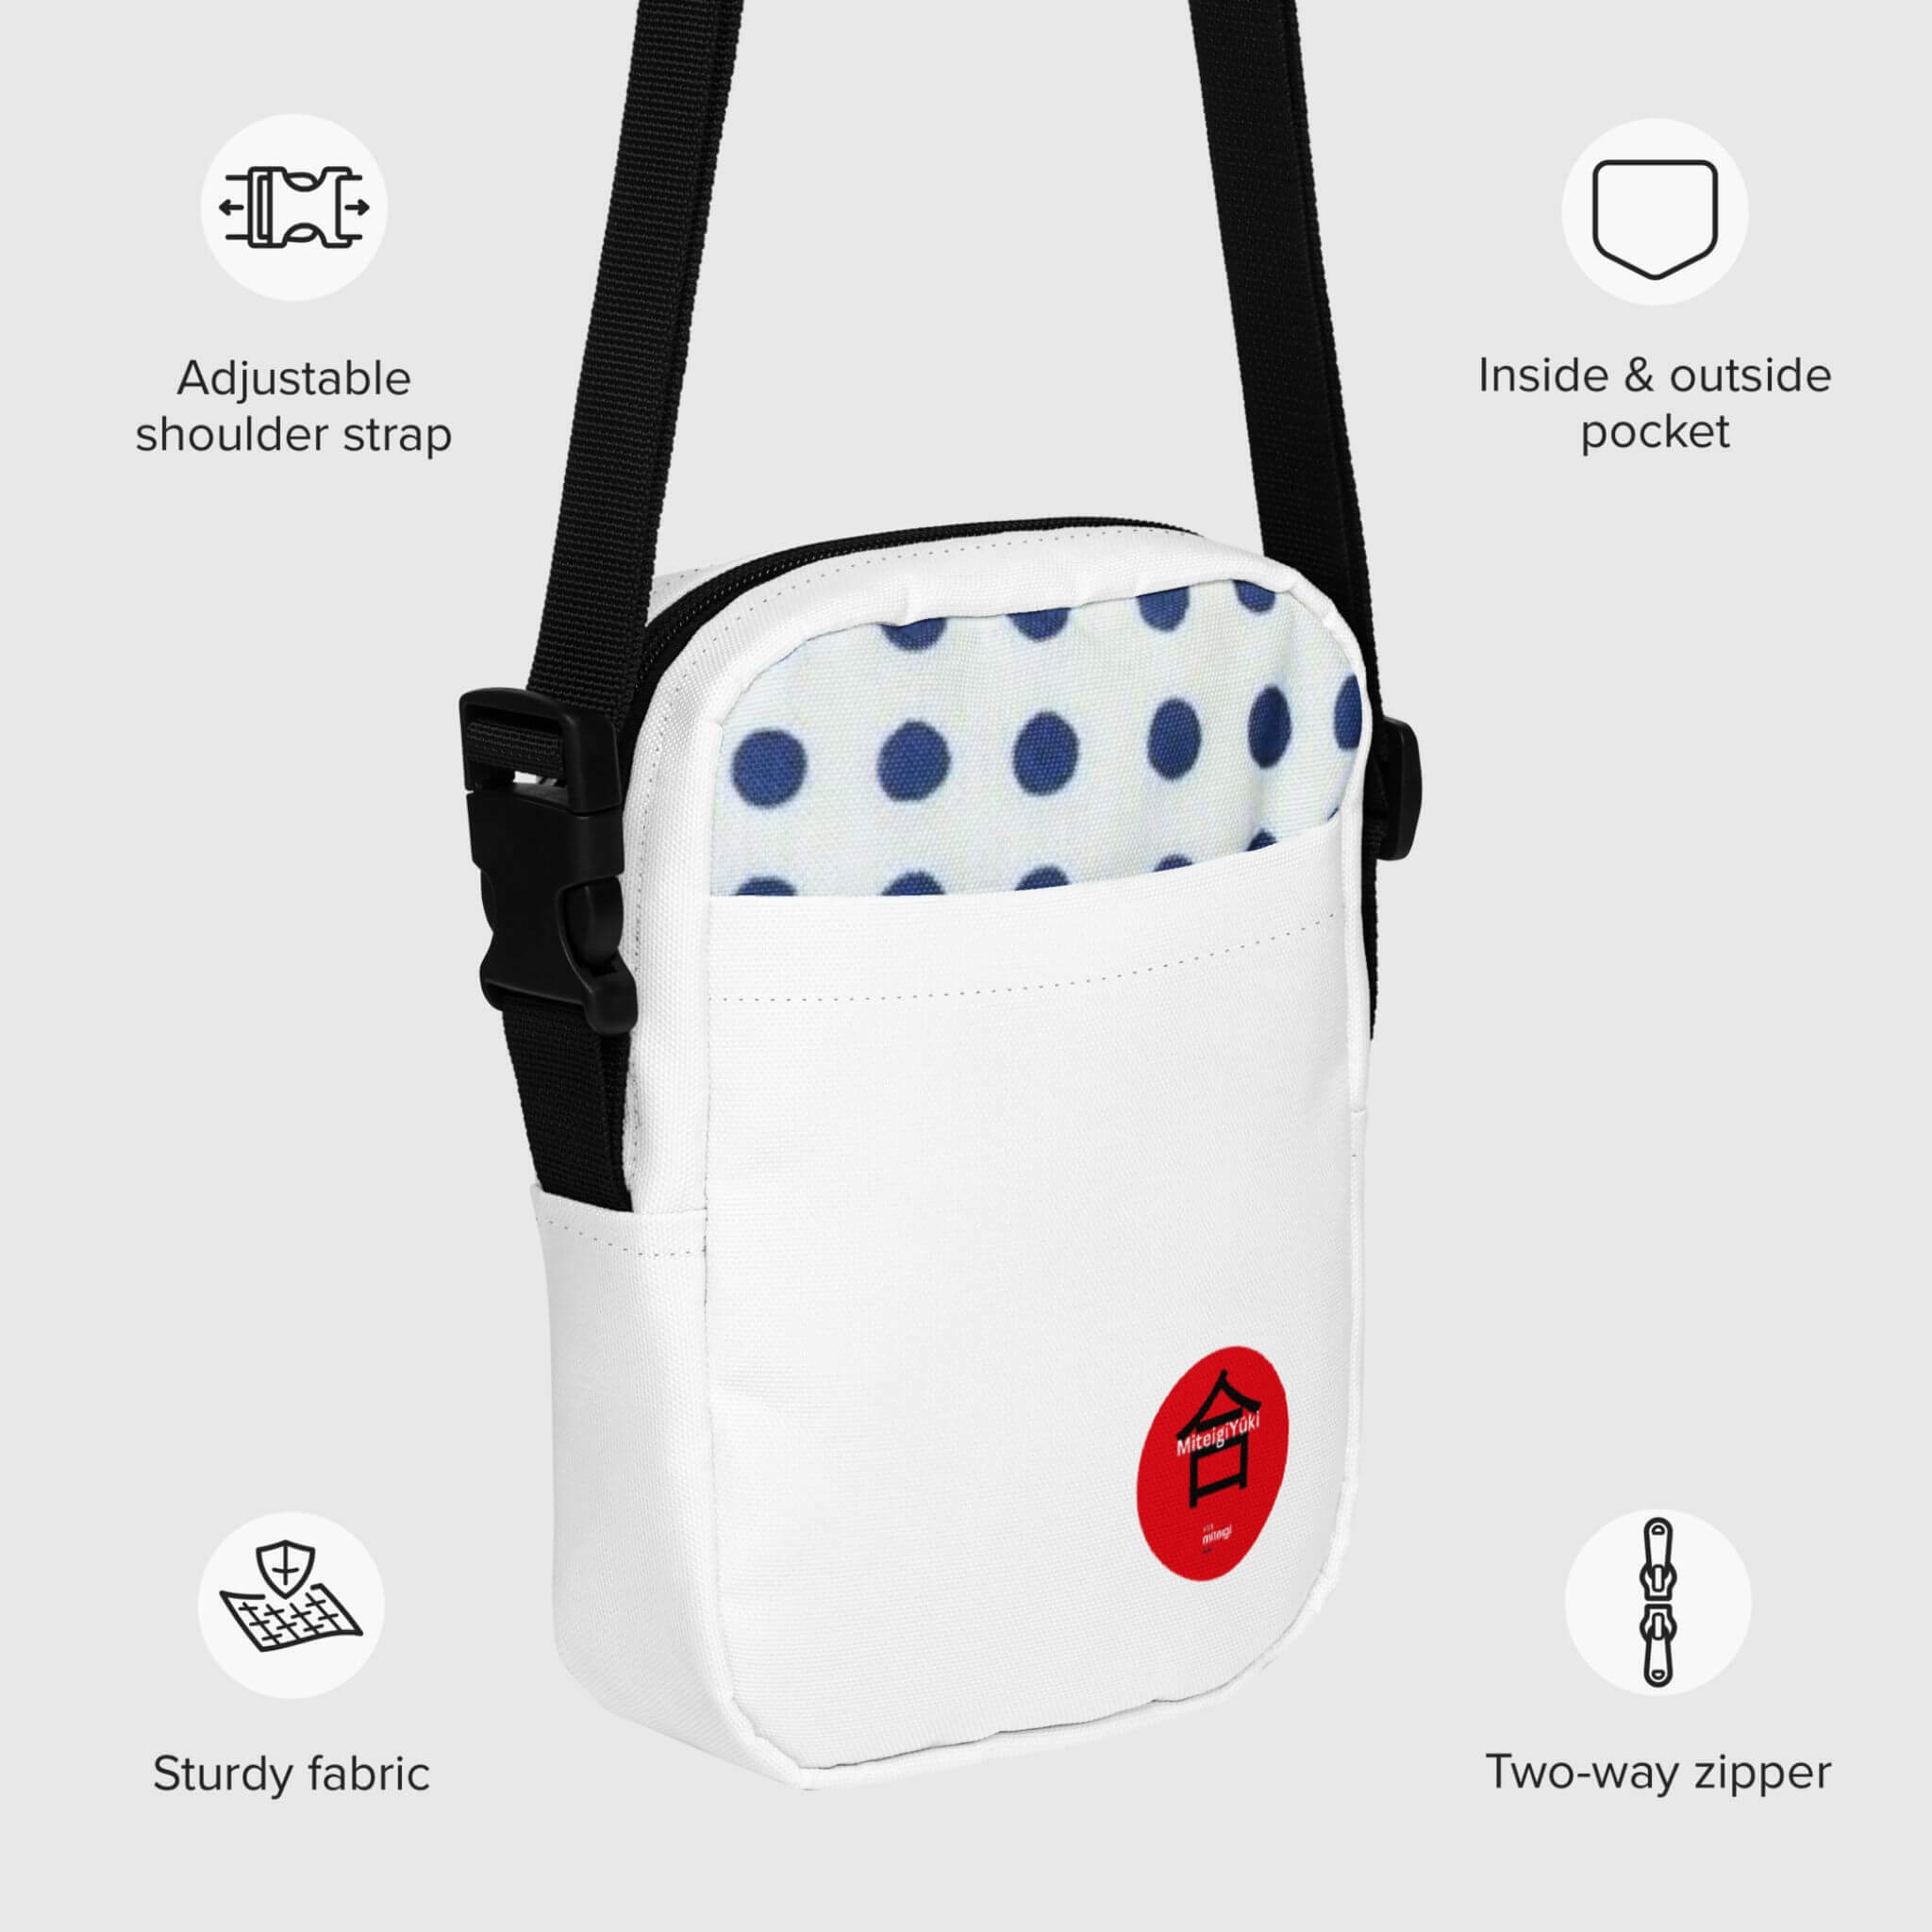 Utility Crossbody Bag MiteigiYūki Logo   Unisex Men’s Women’s miteigiYūki by miteigi everyday use Japanese shoulder bags Luggage for man woman in white with red design and Mameshibori pattern highlights womens mens accessory